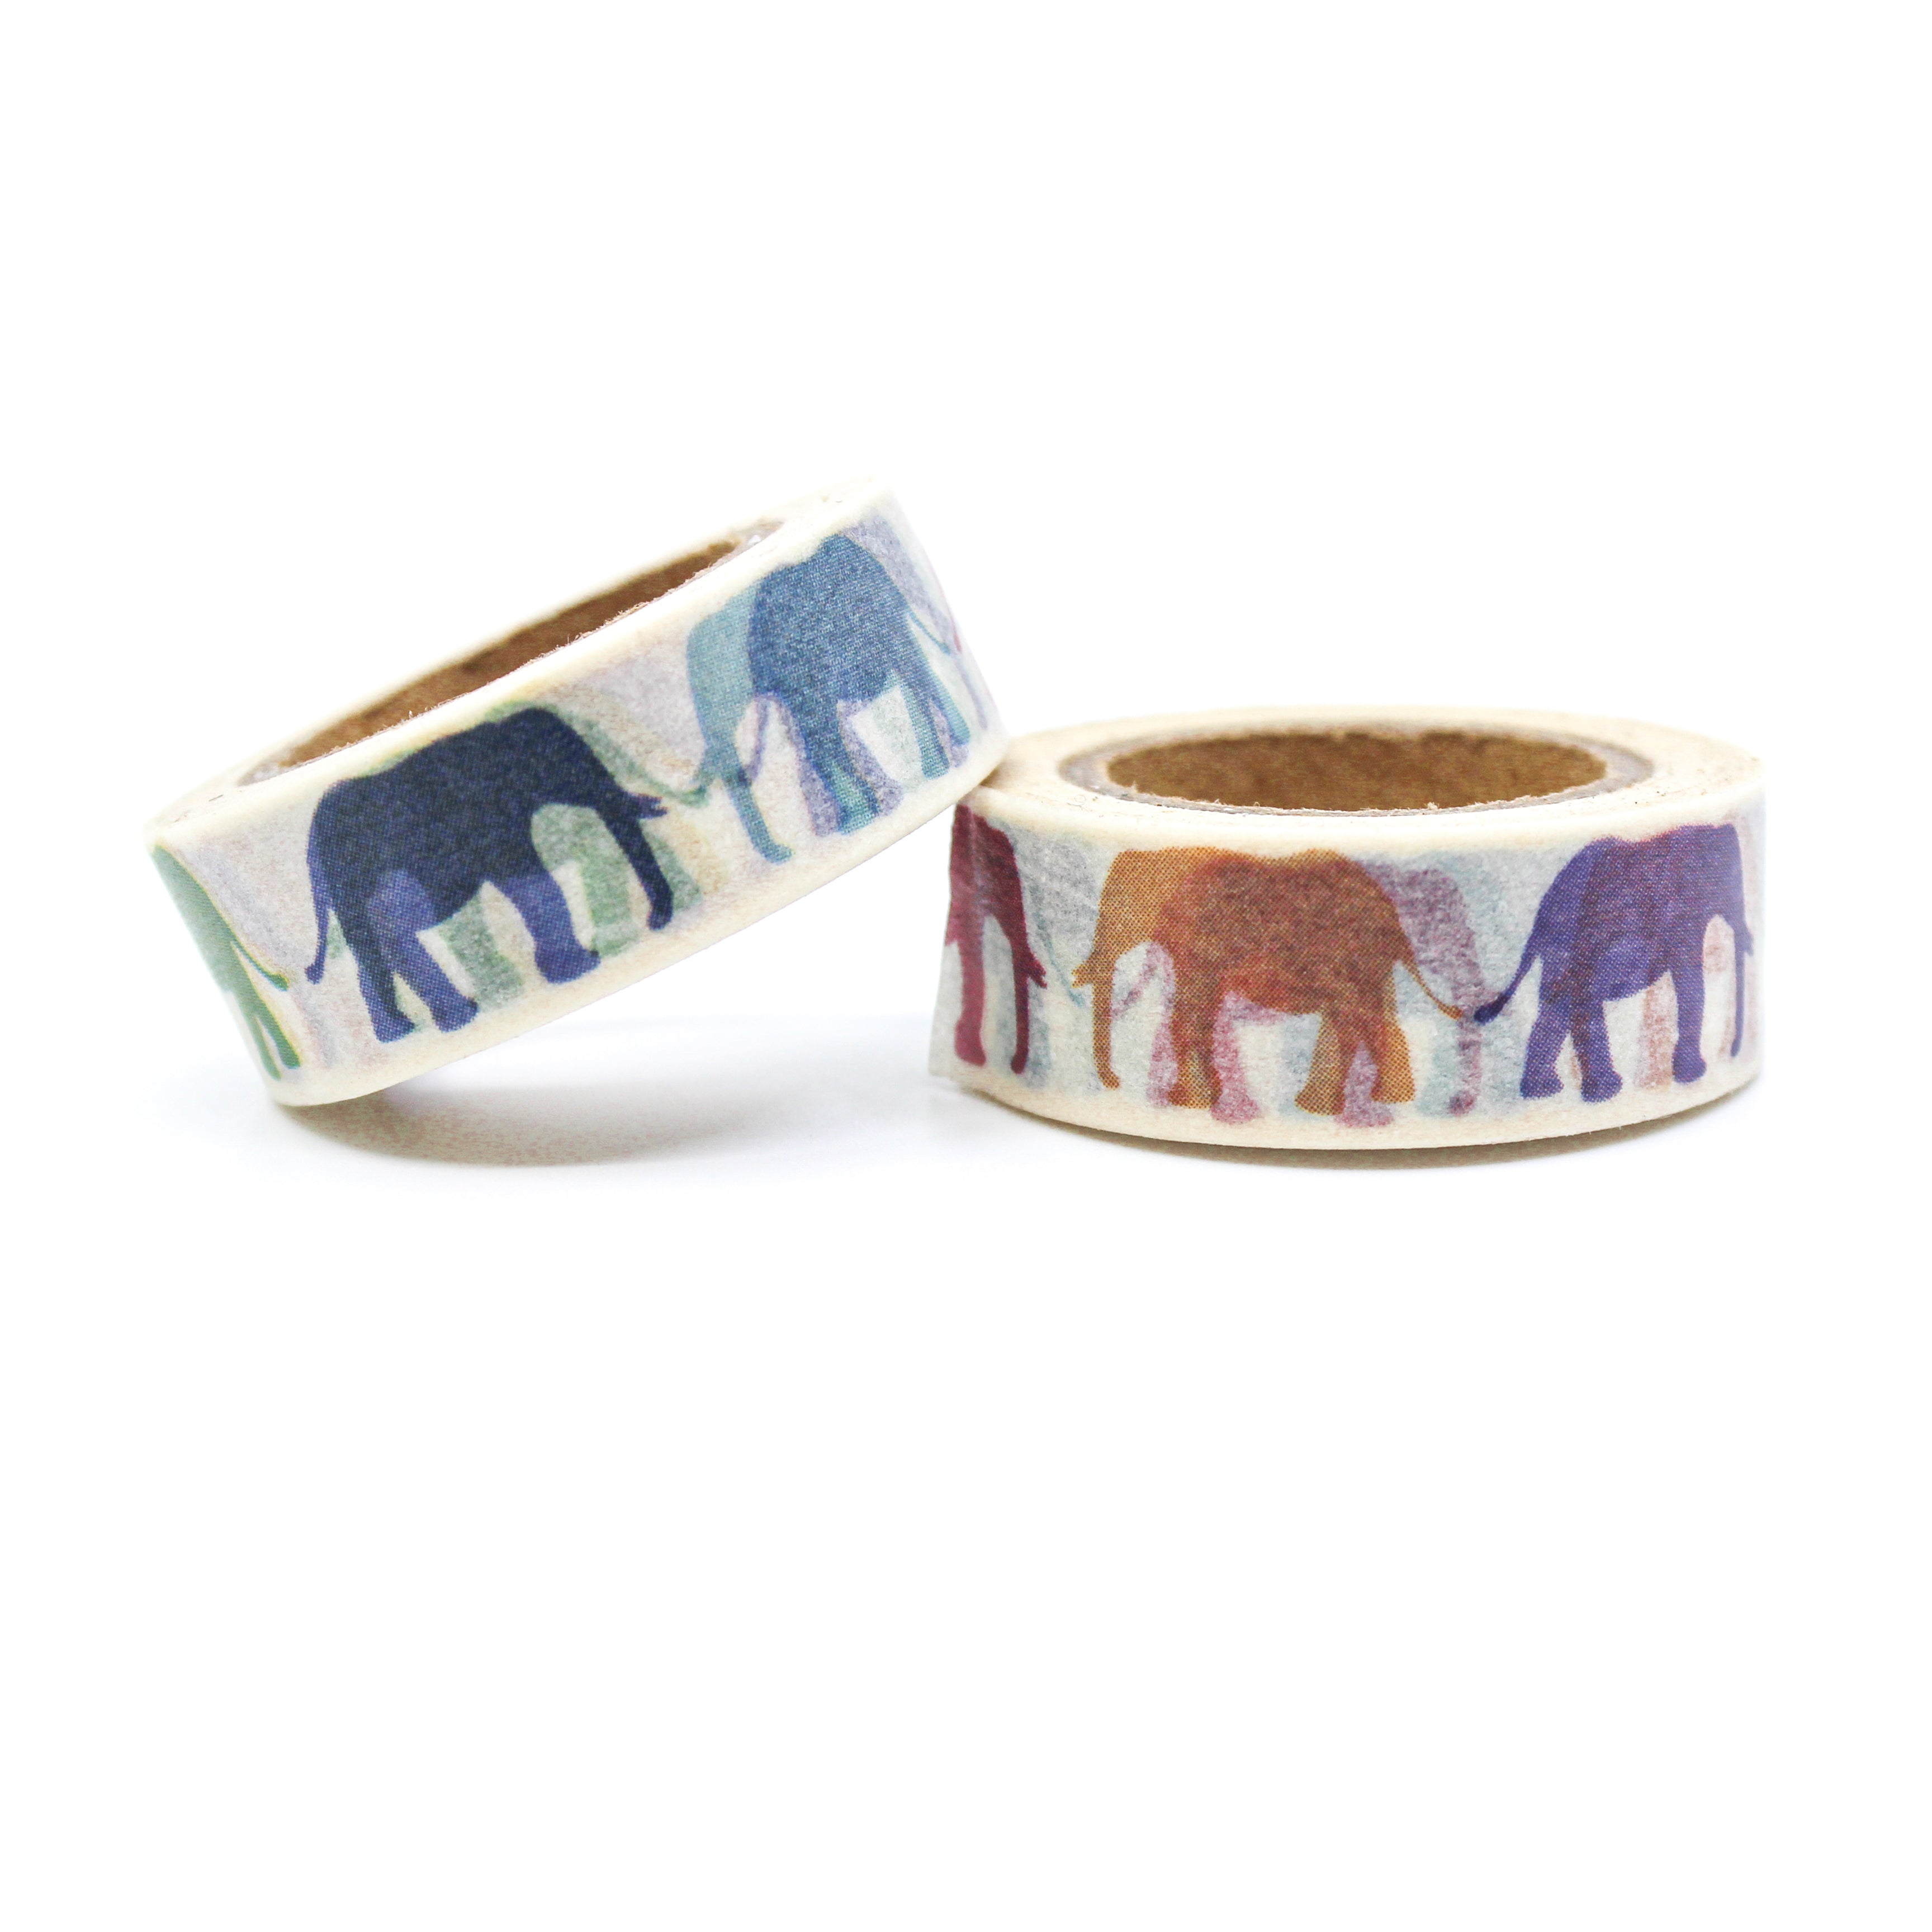 This is a variety color of elephants pattern for Journal Supplies, Scrapbooking washi tapes from BBB Supplies Craft Shop